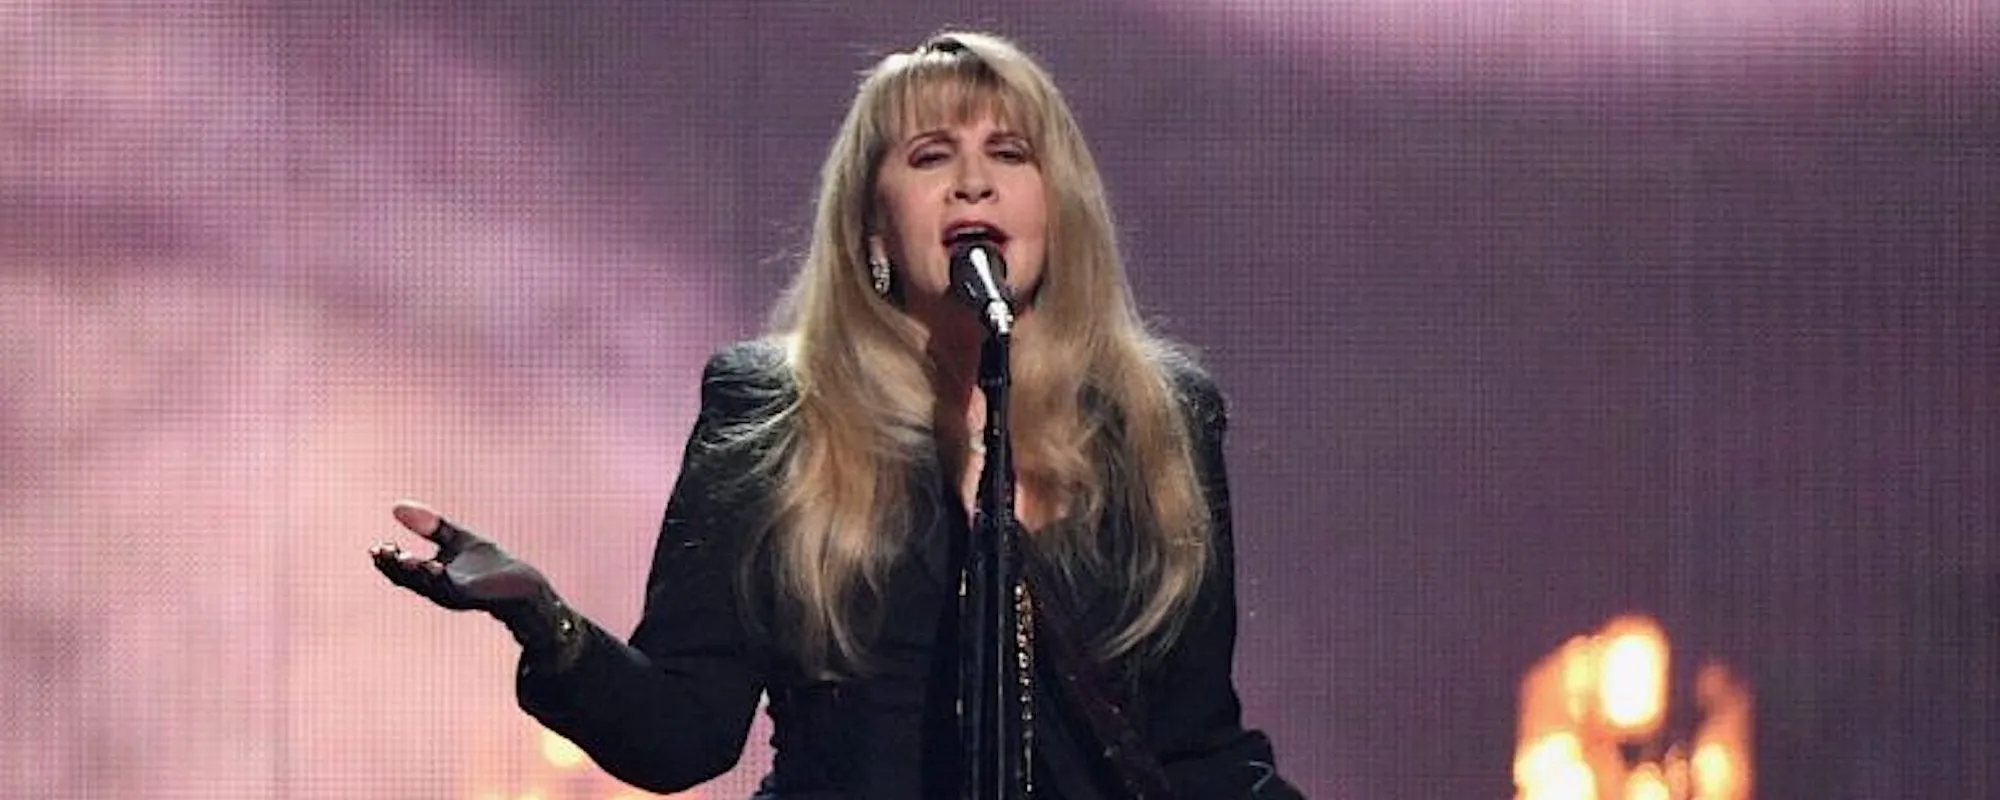 Stevie Nicks Releases First New Music Since 2020, Cover of Buffalo Springfield’s “For What It’s Worth”